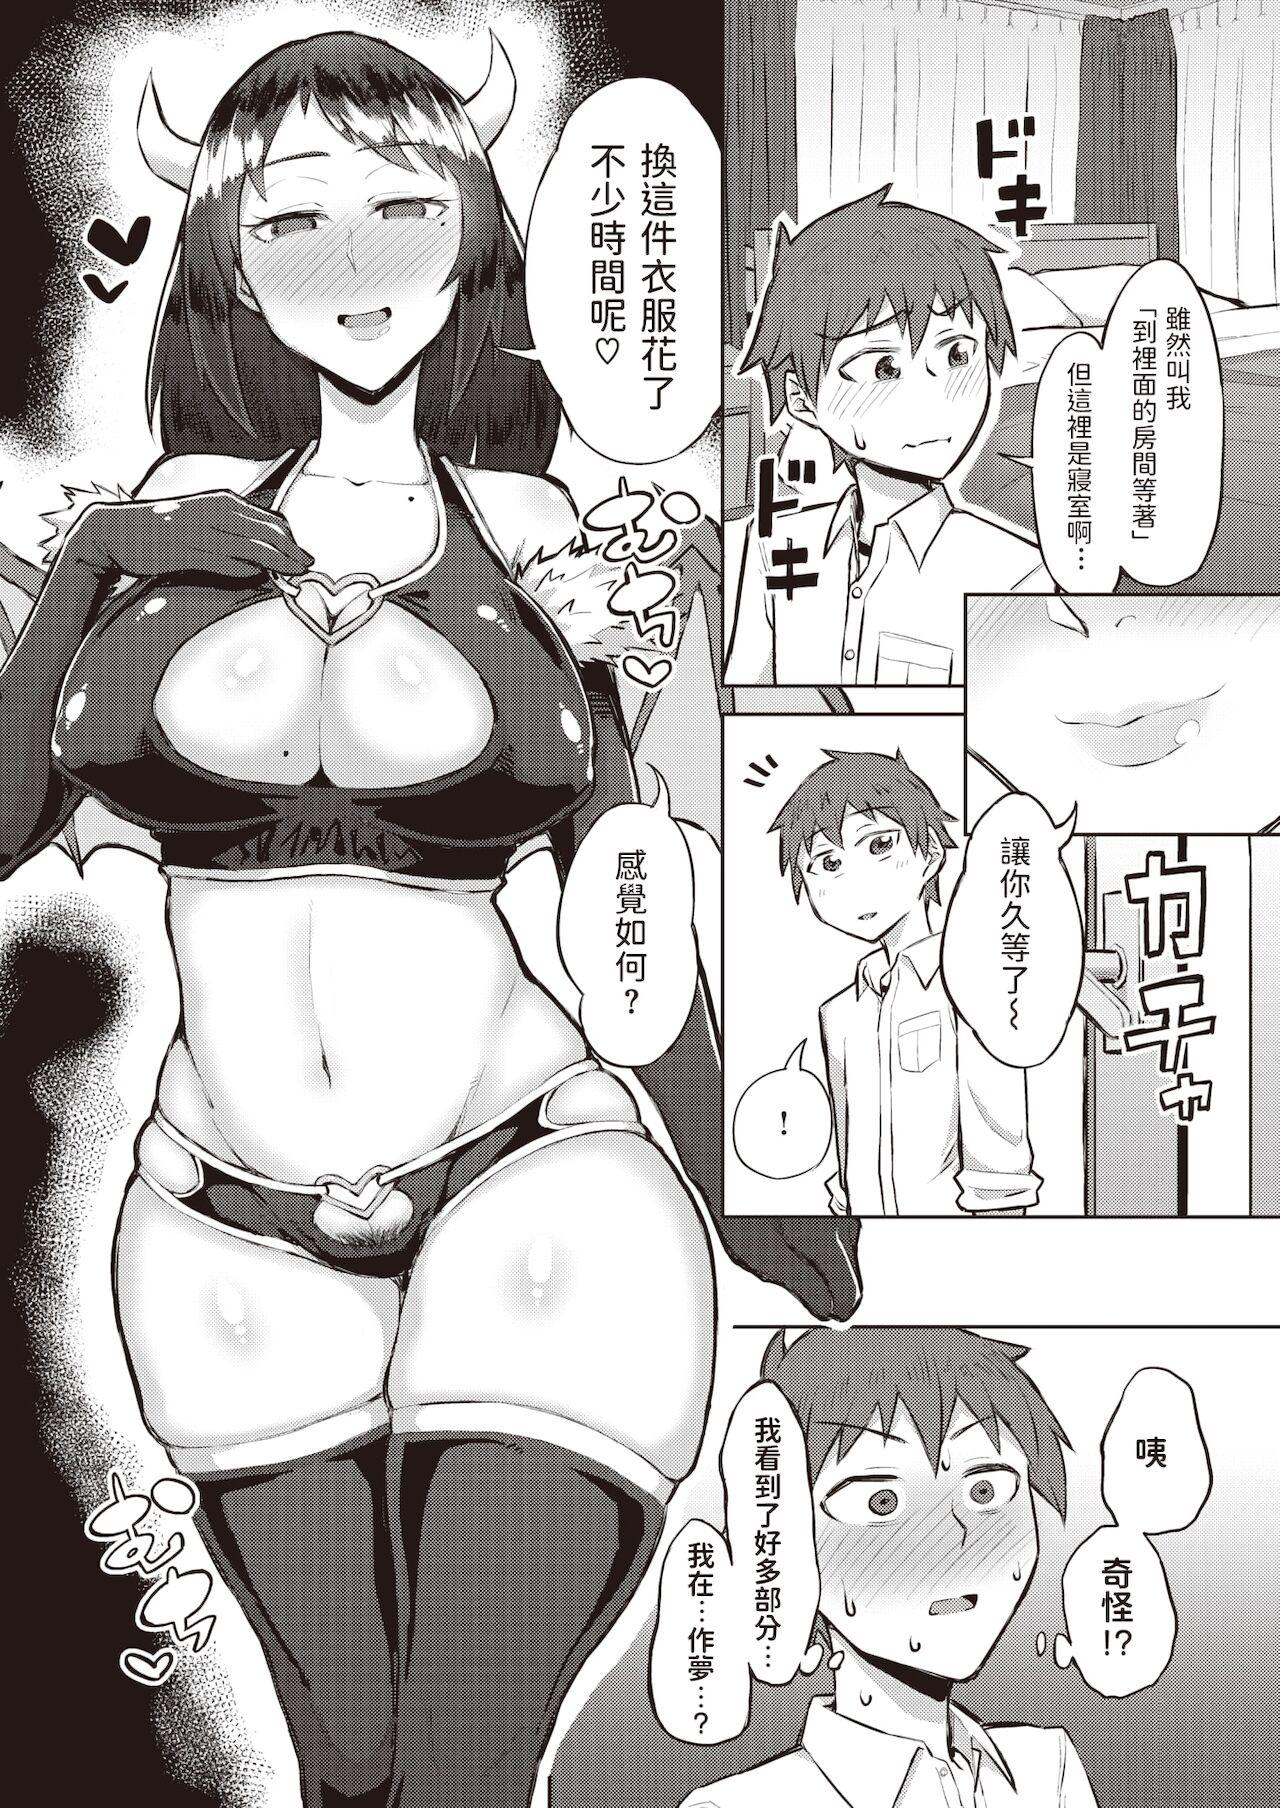 Foreplay [悪天候] るっくあっとみー (COMIC 失楽天 2019年12月号) 中文翻譯 Twink - Page 8